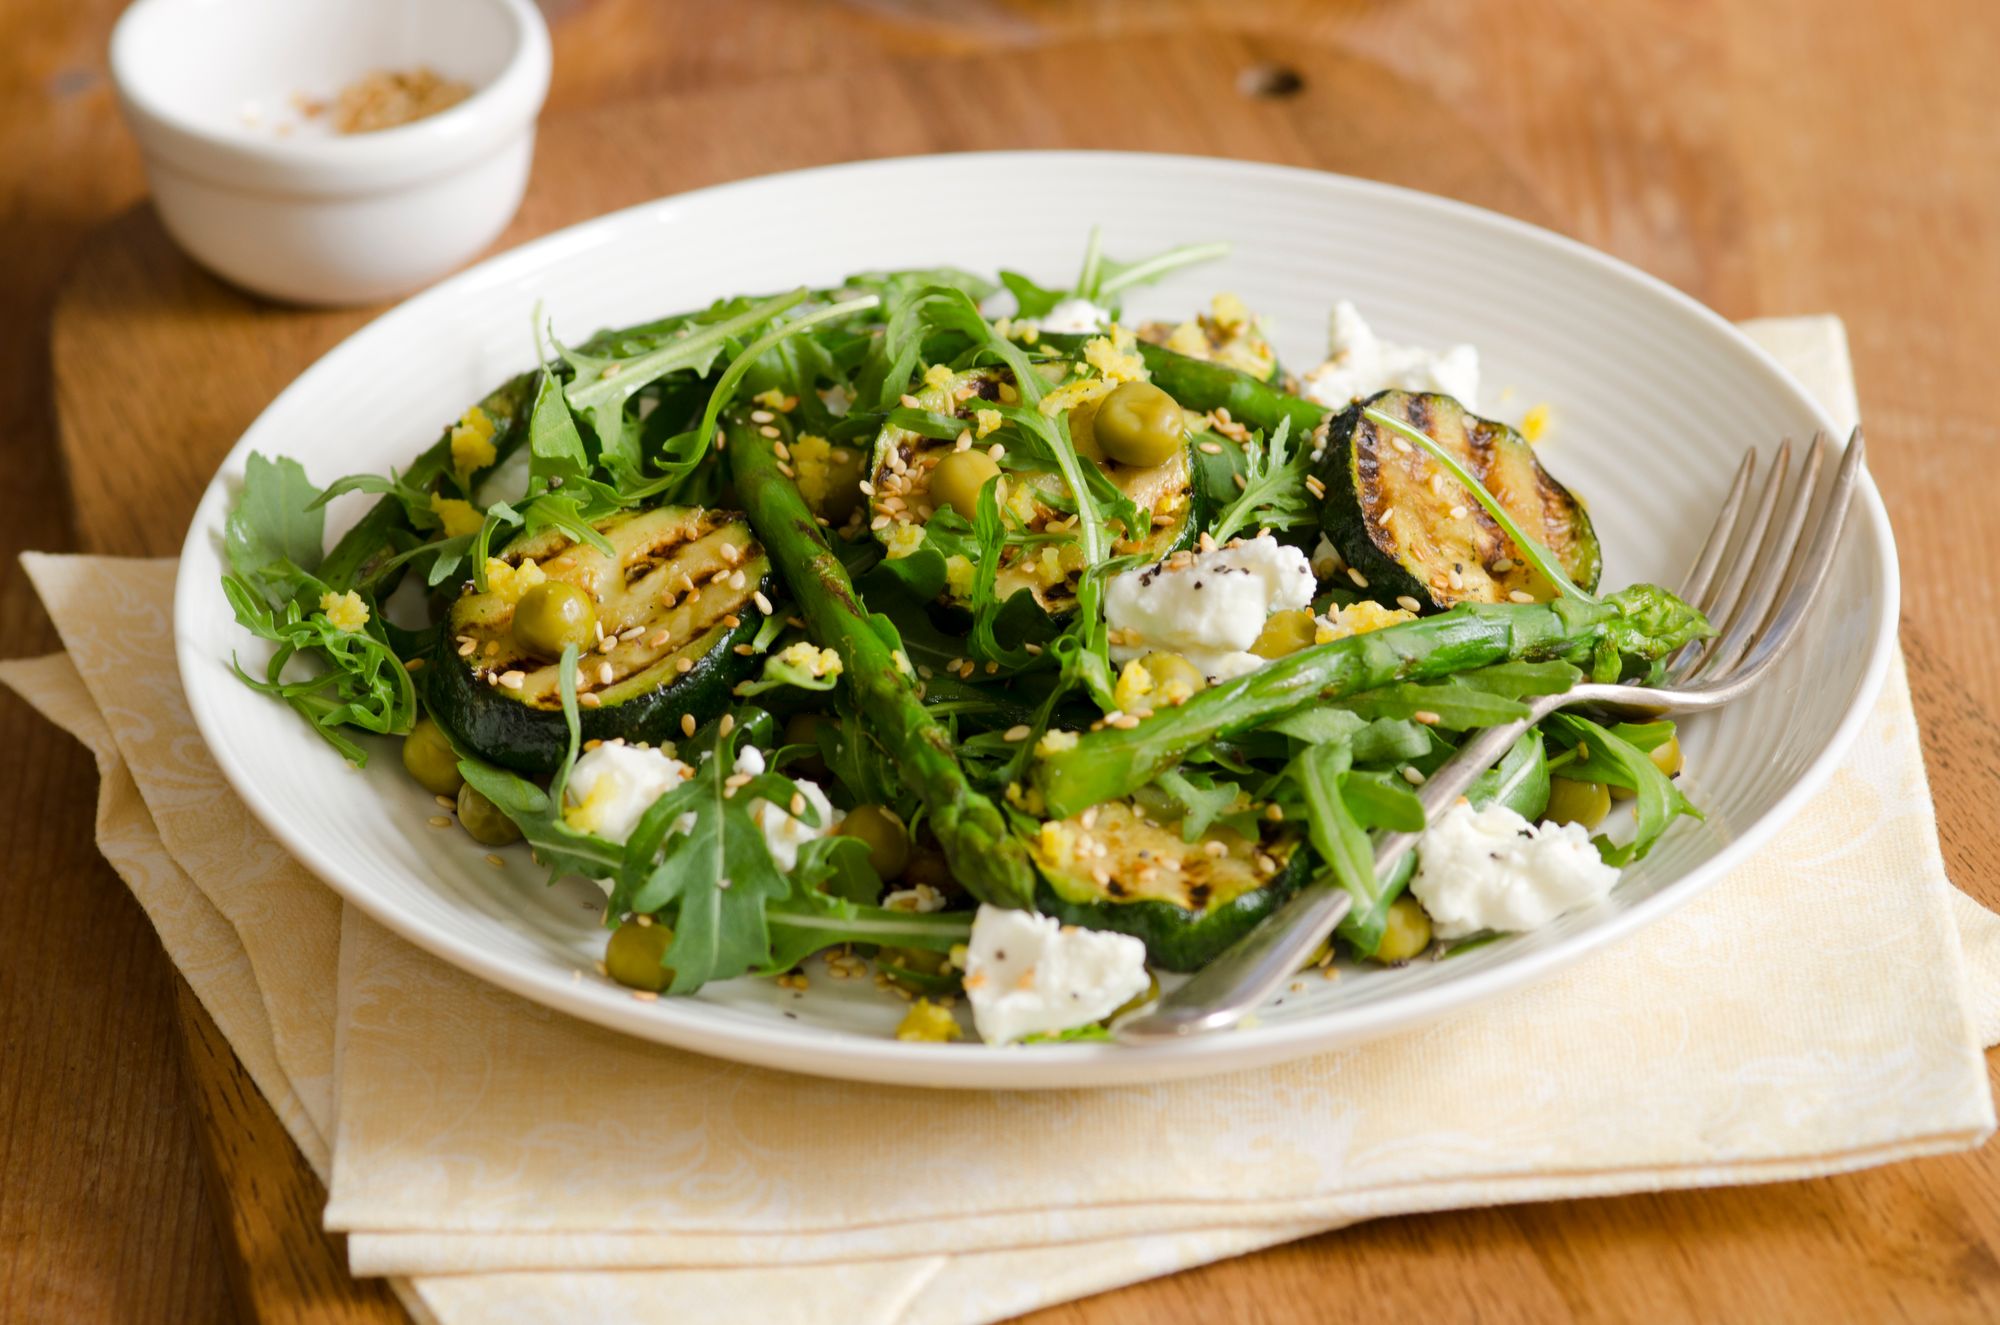 Goat’s Cheese, Asparagus and Chicory Salad